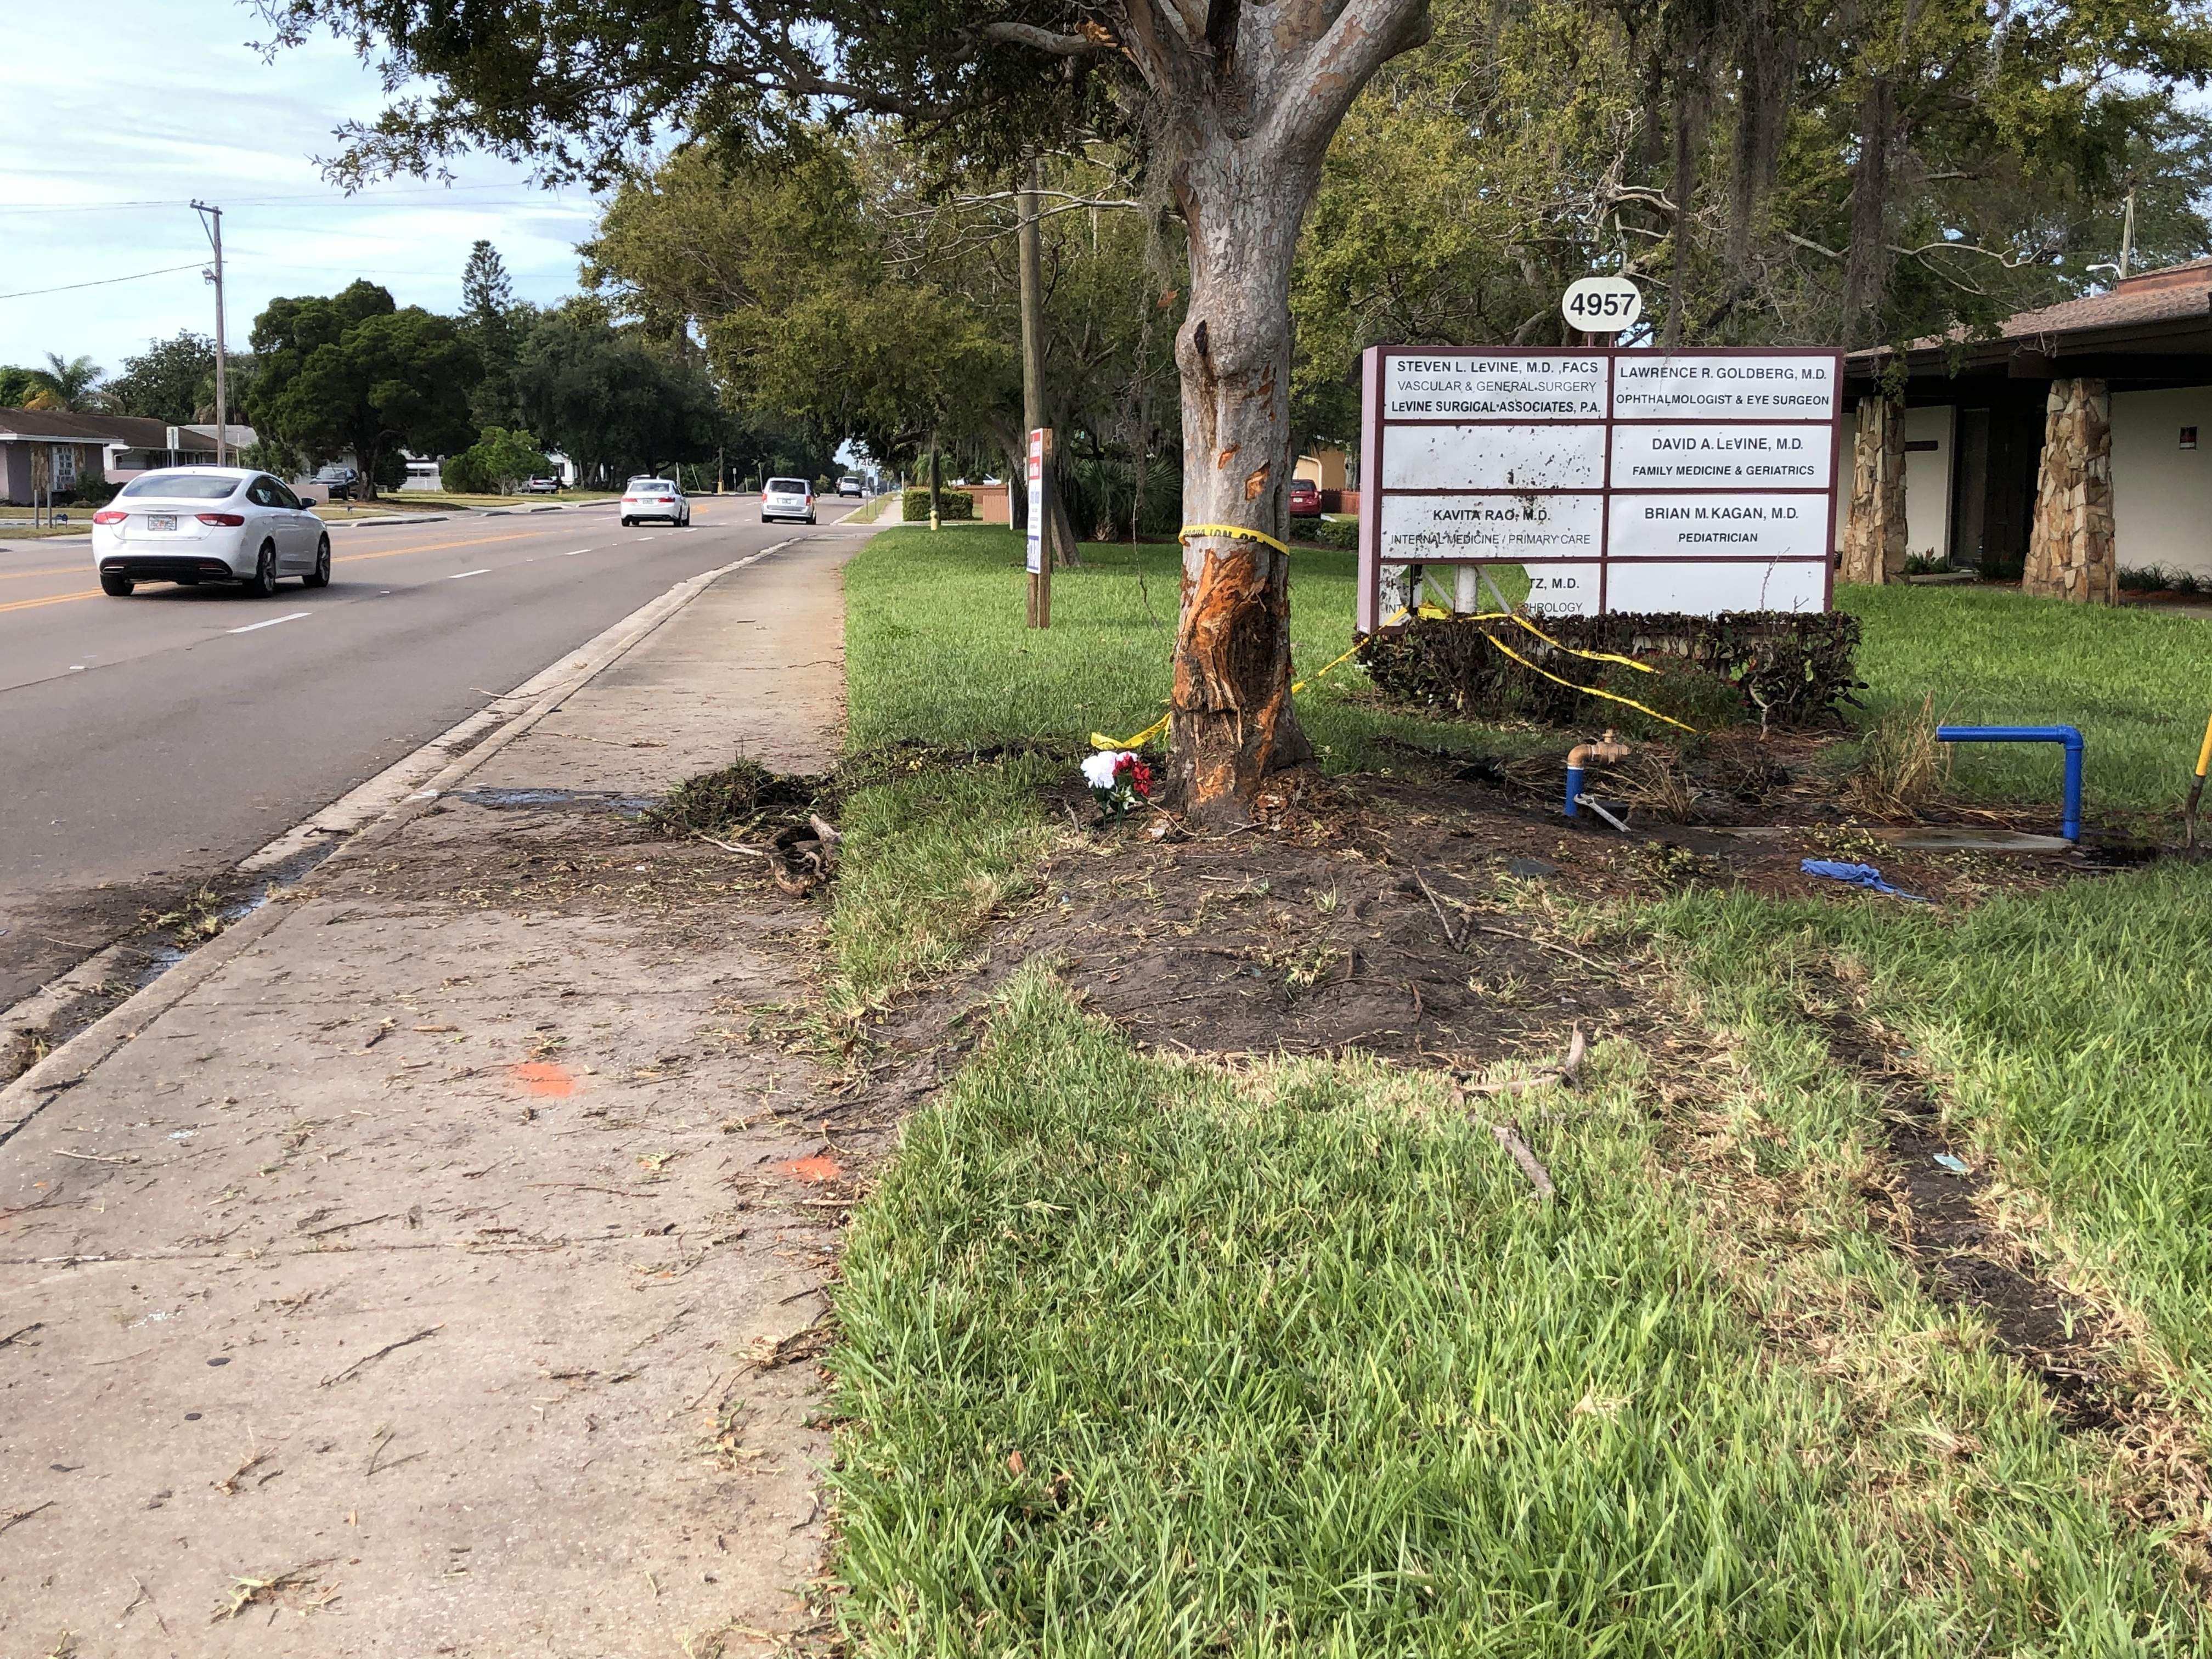 Surprise ditch in St. Petersburg park leaves neighbors outraged